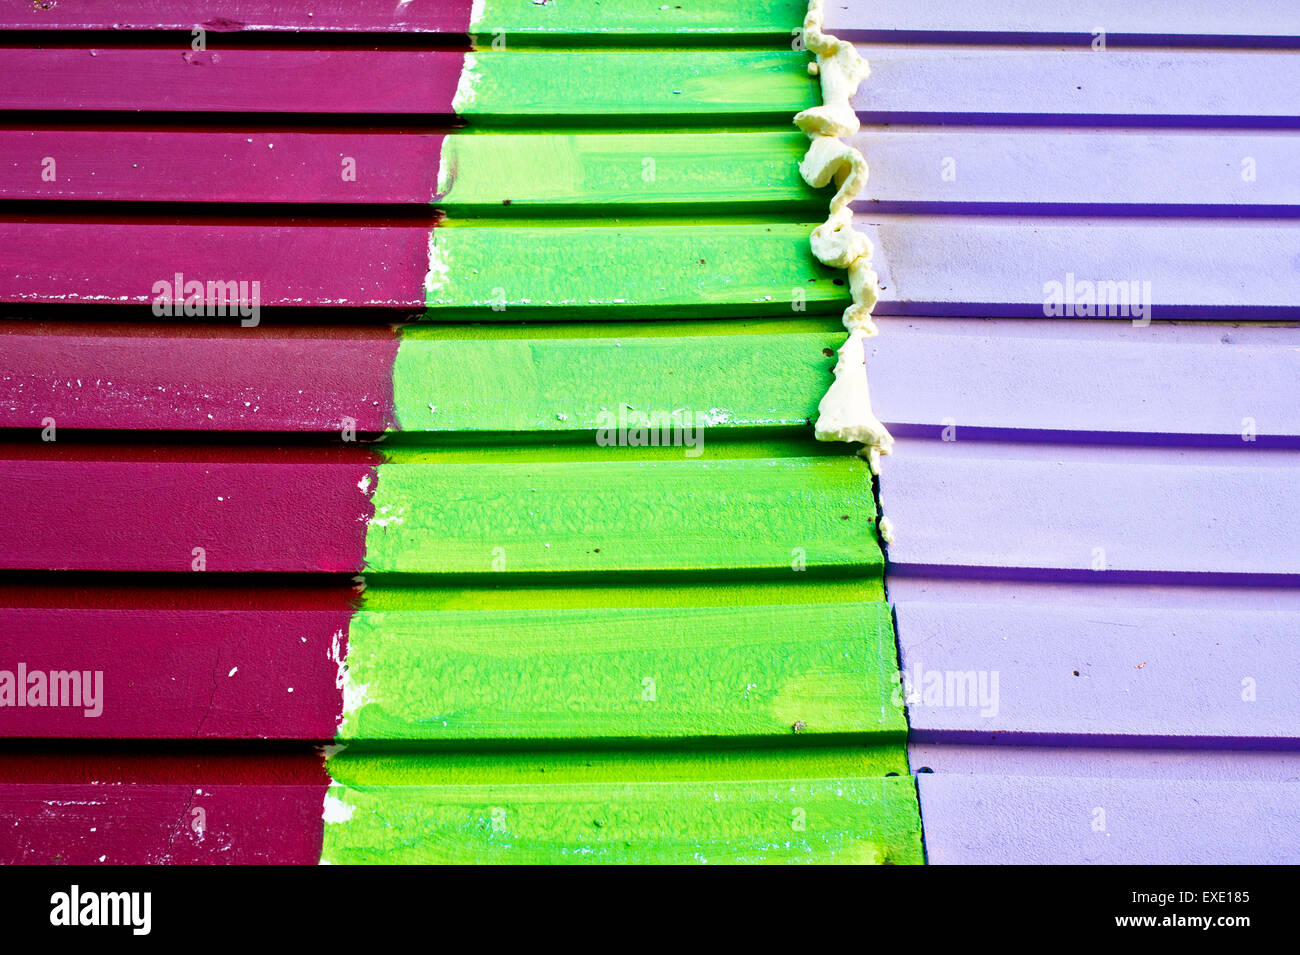 Purple,green,and red wood panels with adhesive resin Stock Photo